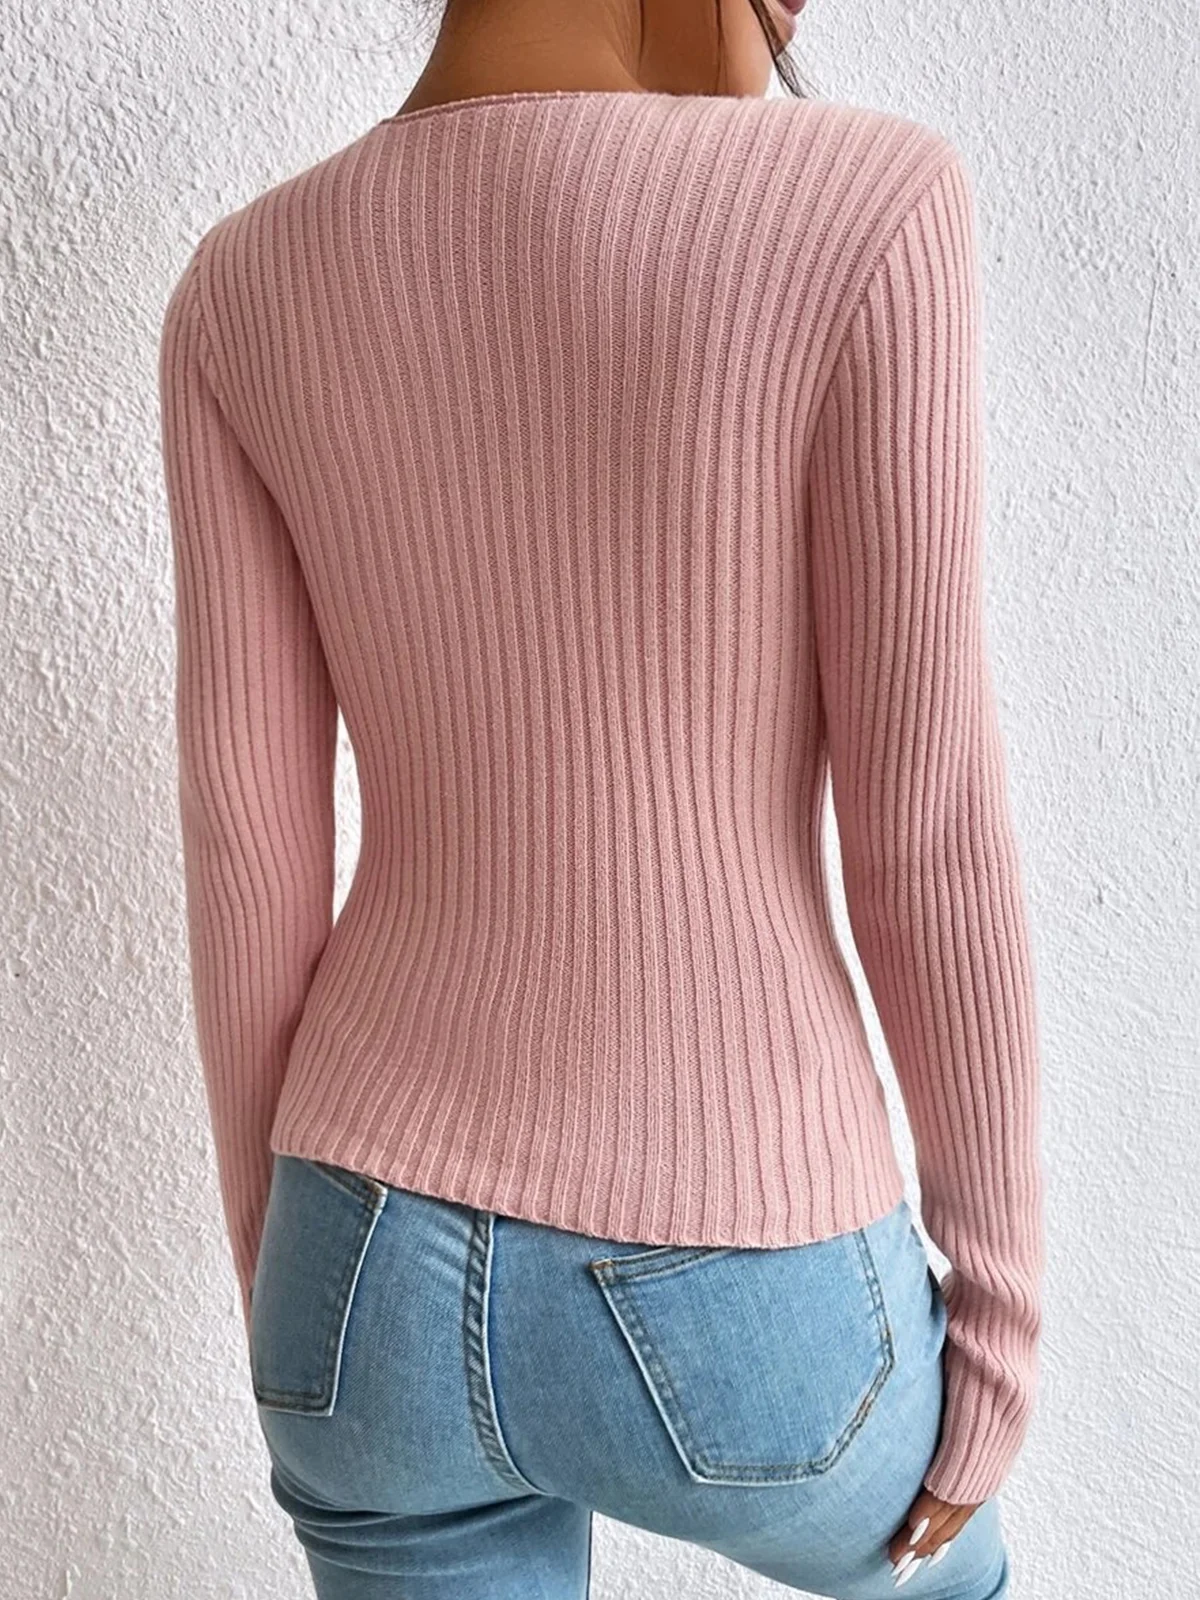 Sexy Fit X-Line Daily Basic Color Block Buckle Cross V Neck Irregular Craftsmanship Casual Long Sleeve Sweater